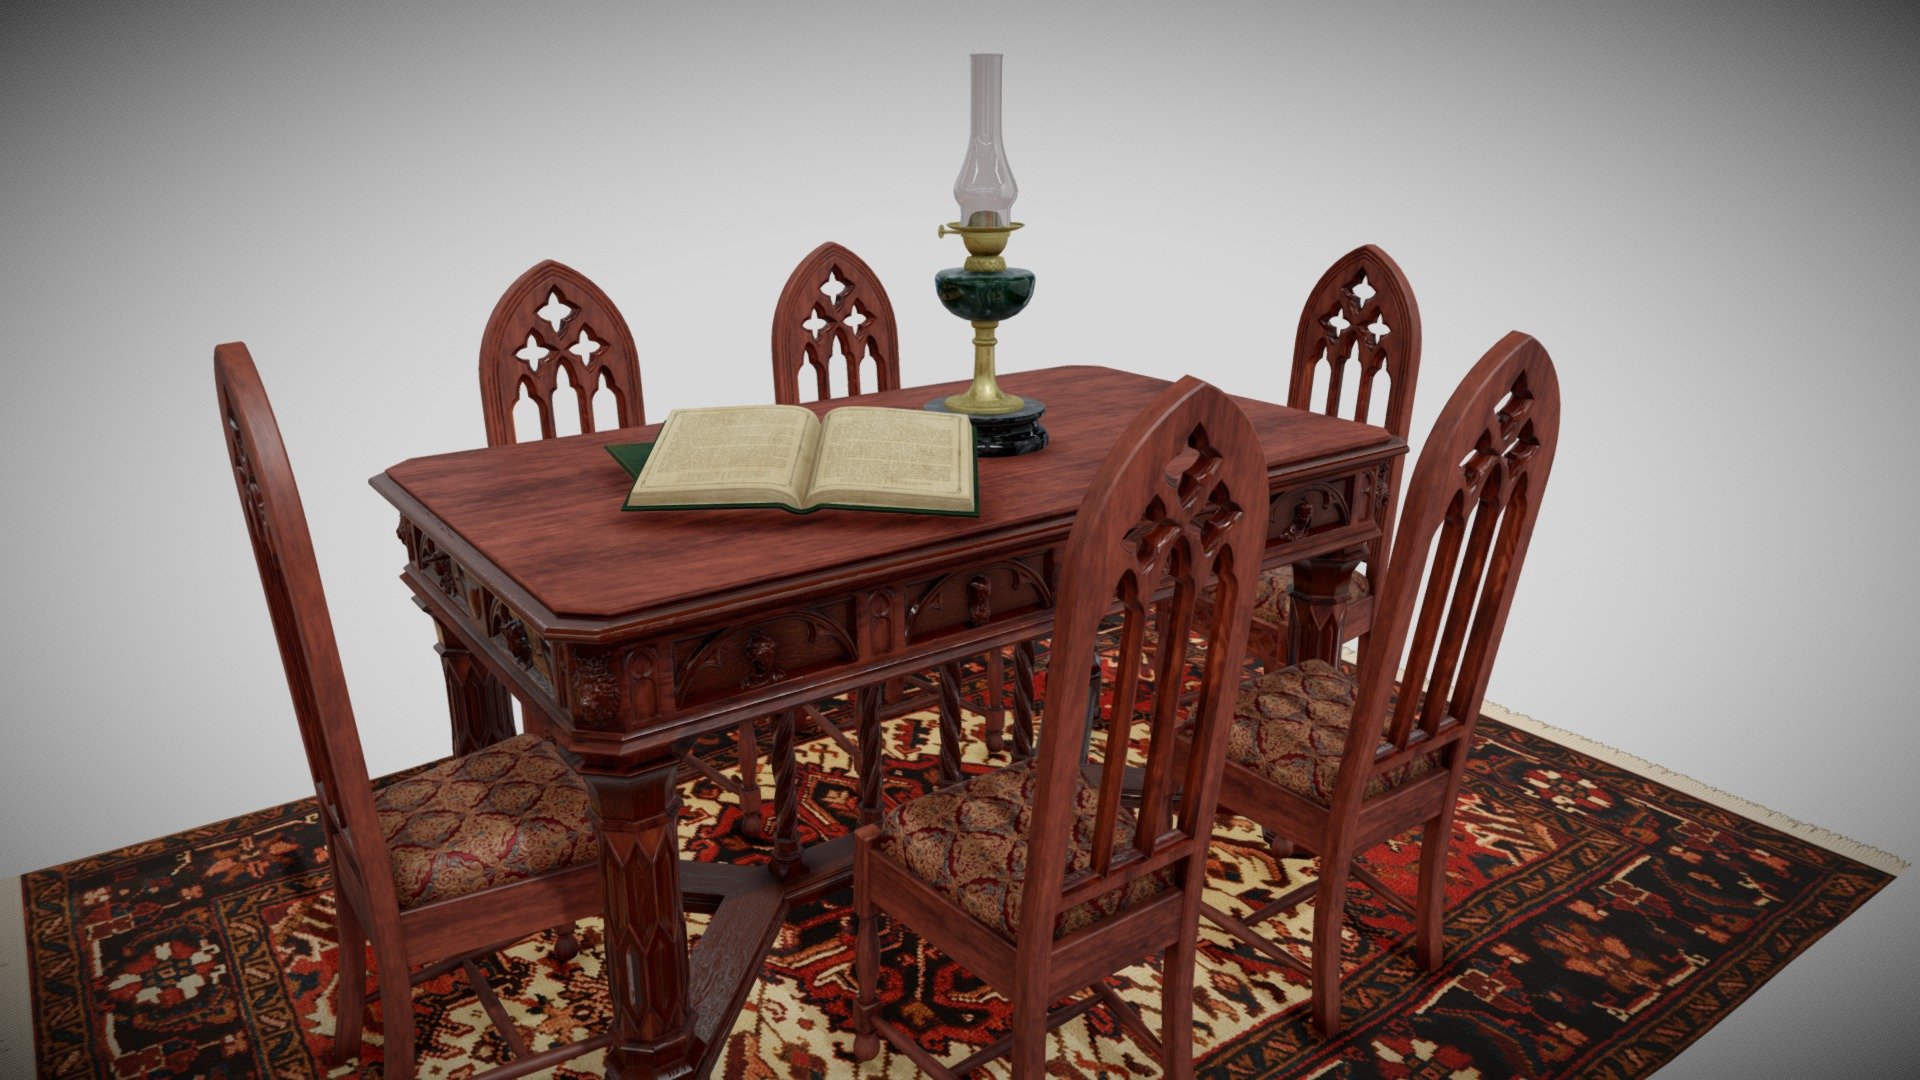 Gothic dining furniture set scene includes gothic table with embossed heads, a chair with ornaments, an oil lamp and carpe. Whole scene is designed for using in the late 19th century or early 20th century 3d model